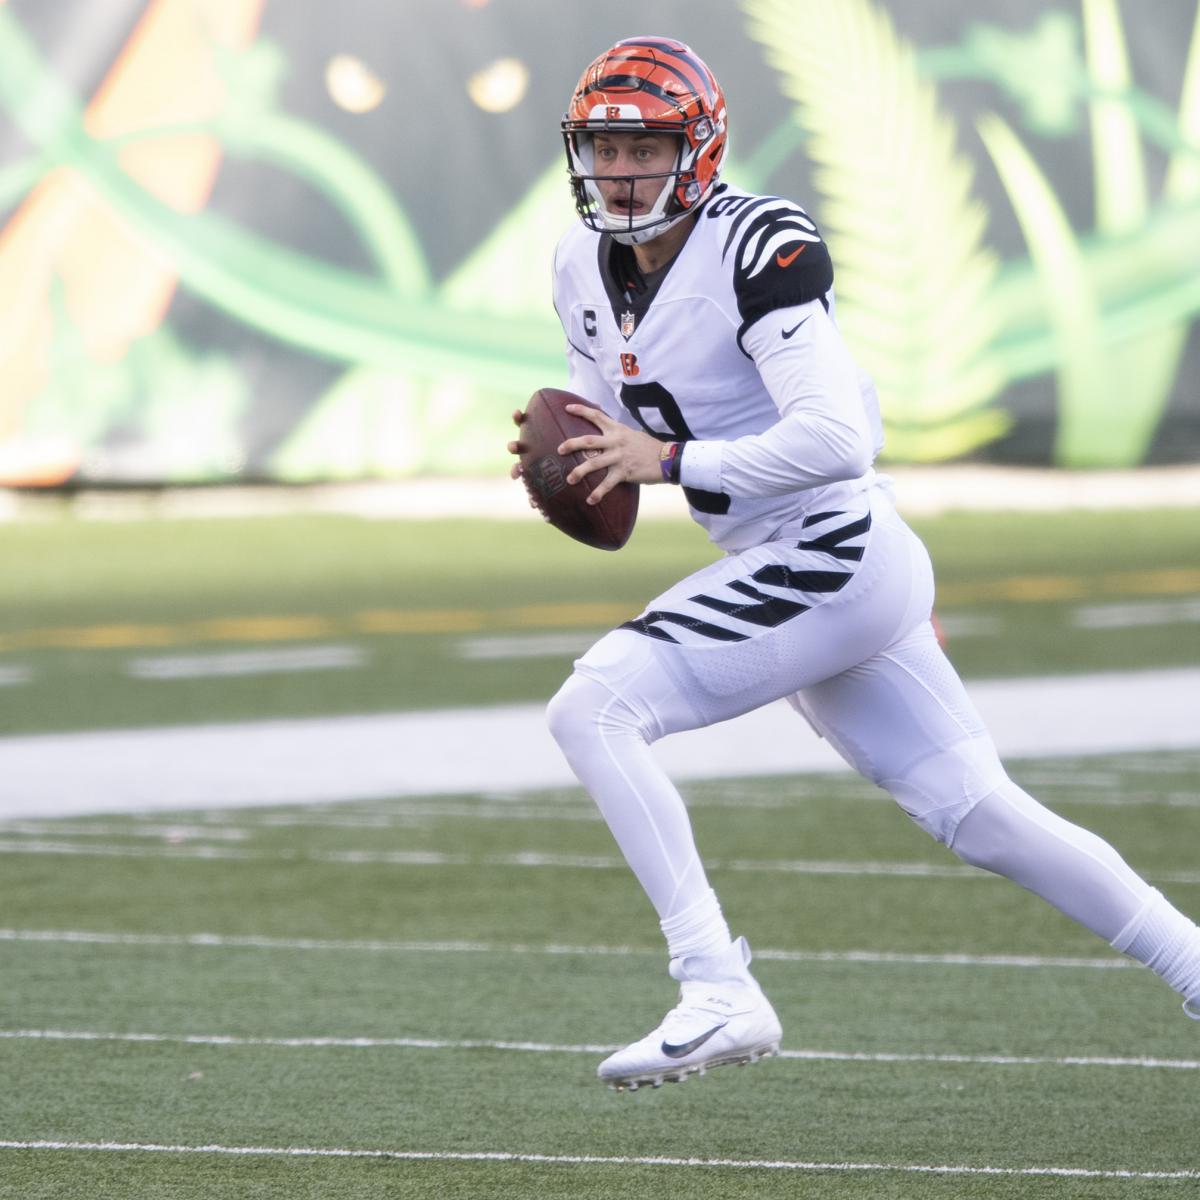 LOOK: Bengals reveal white on white color rush uniforms ahead of